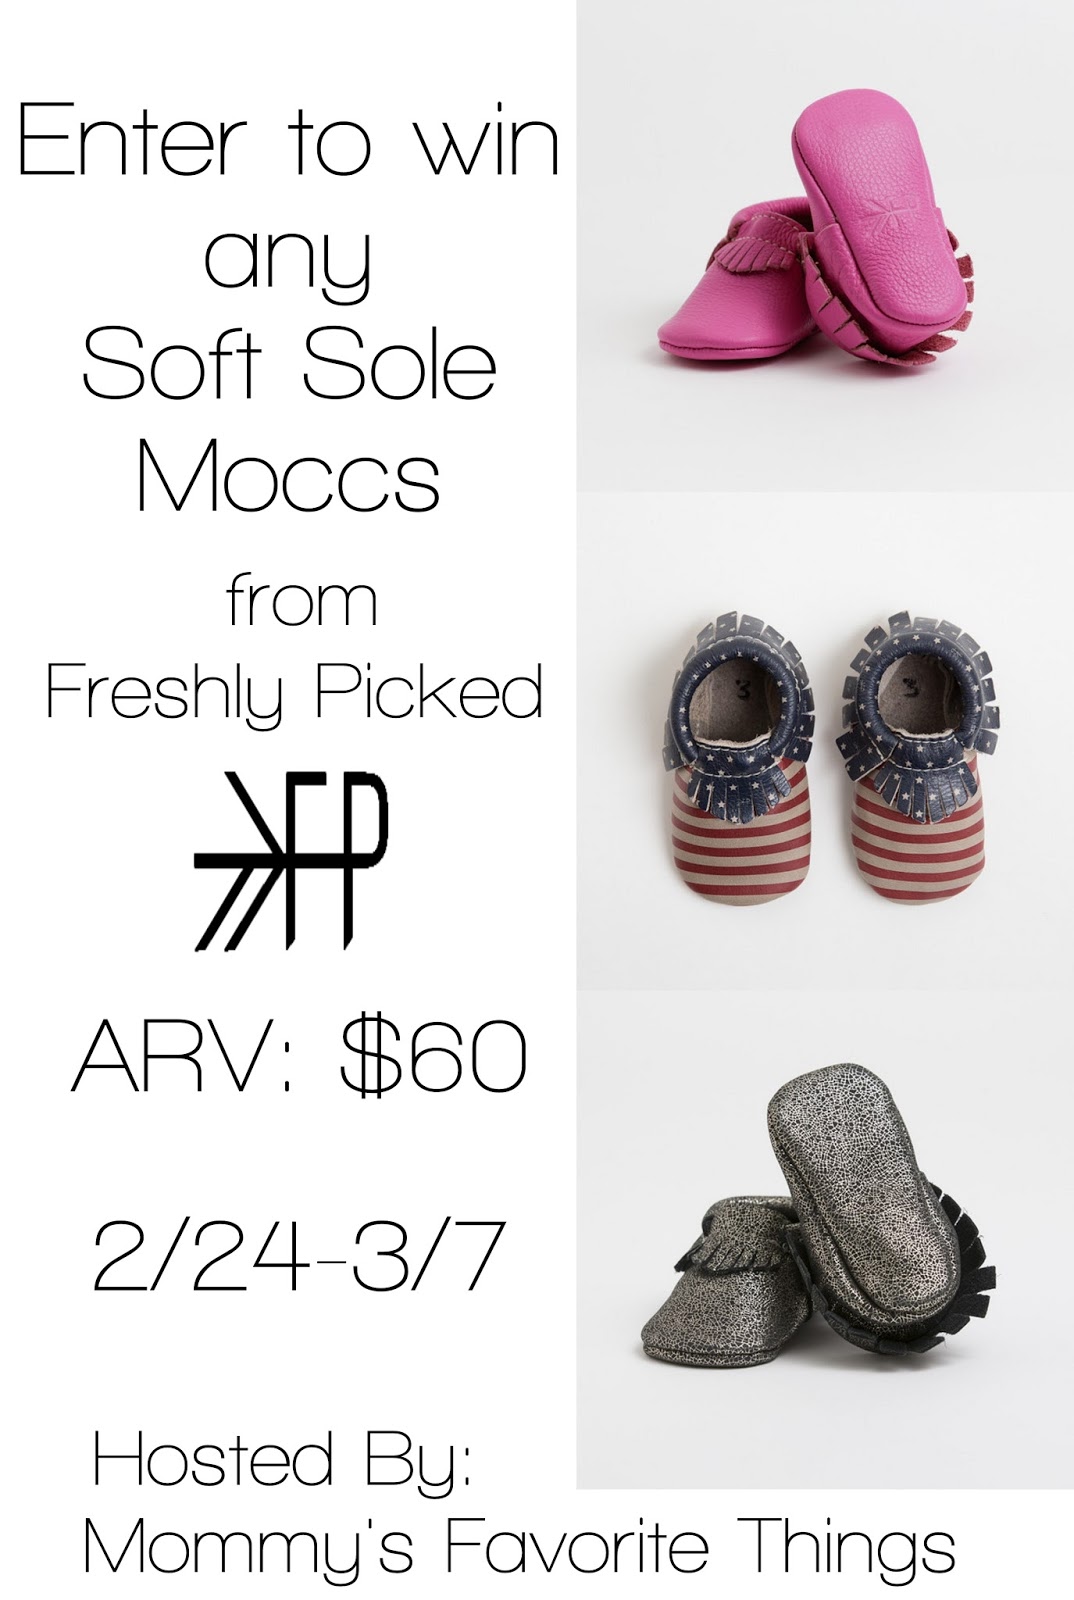 Mommy's Favorite Things: Our Favorite Shoes by Freshly Picked & Giveaway!